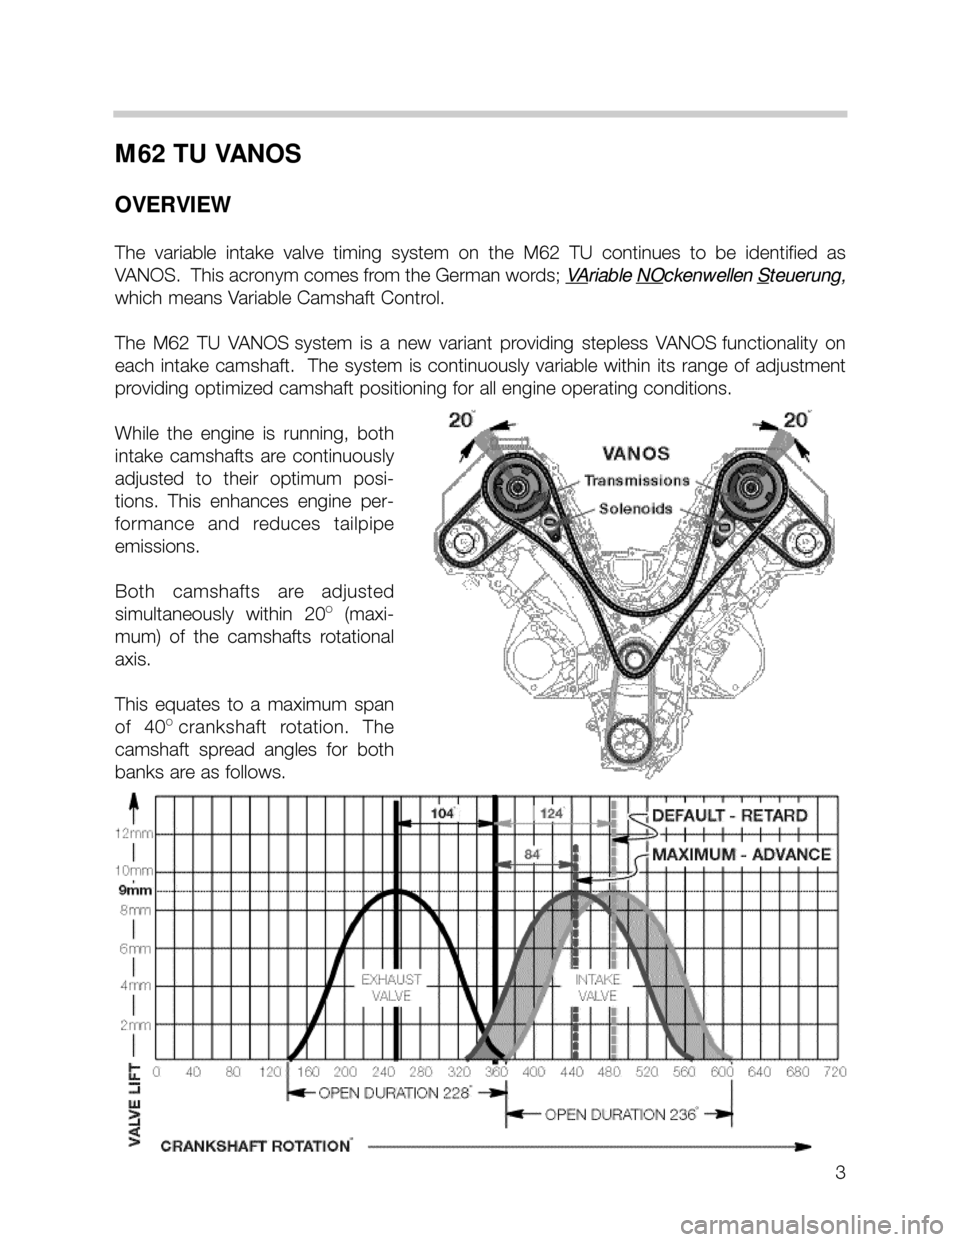 BMW X5 1999 E53 M62TU Engine Workshop Manual 3
M62 TU VANOS
OVERVIEW
The  variable  intake  valve  timing  system  on  the  M62  TU  continues  to  be  identified  as
VANOS.  This acronym comes from the German words; V
Ariable NOckenwellen Steue